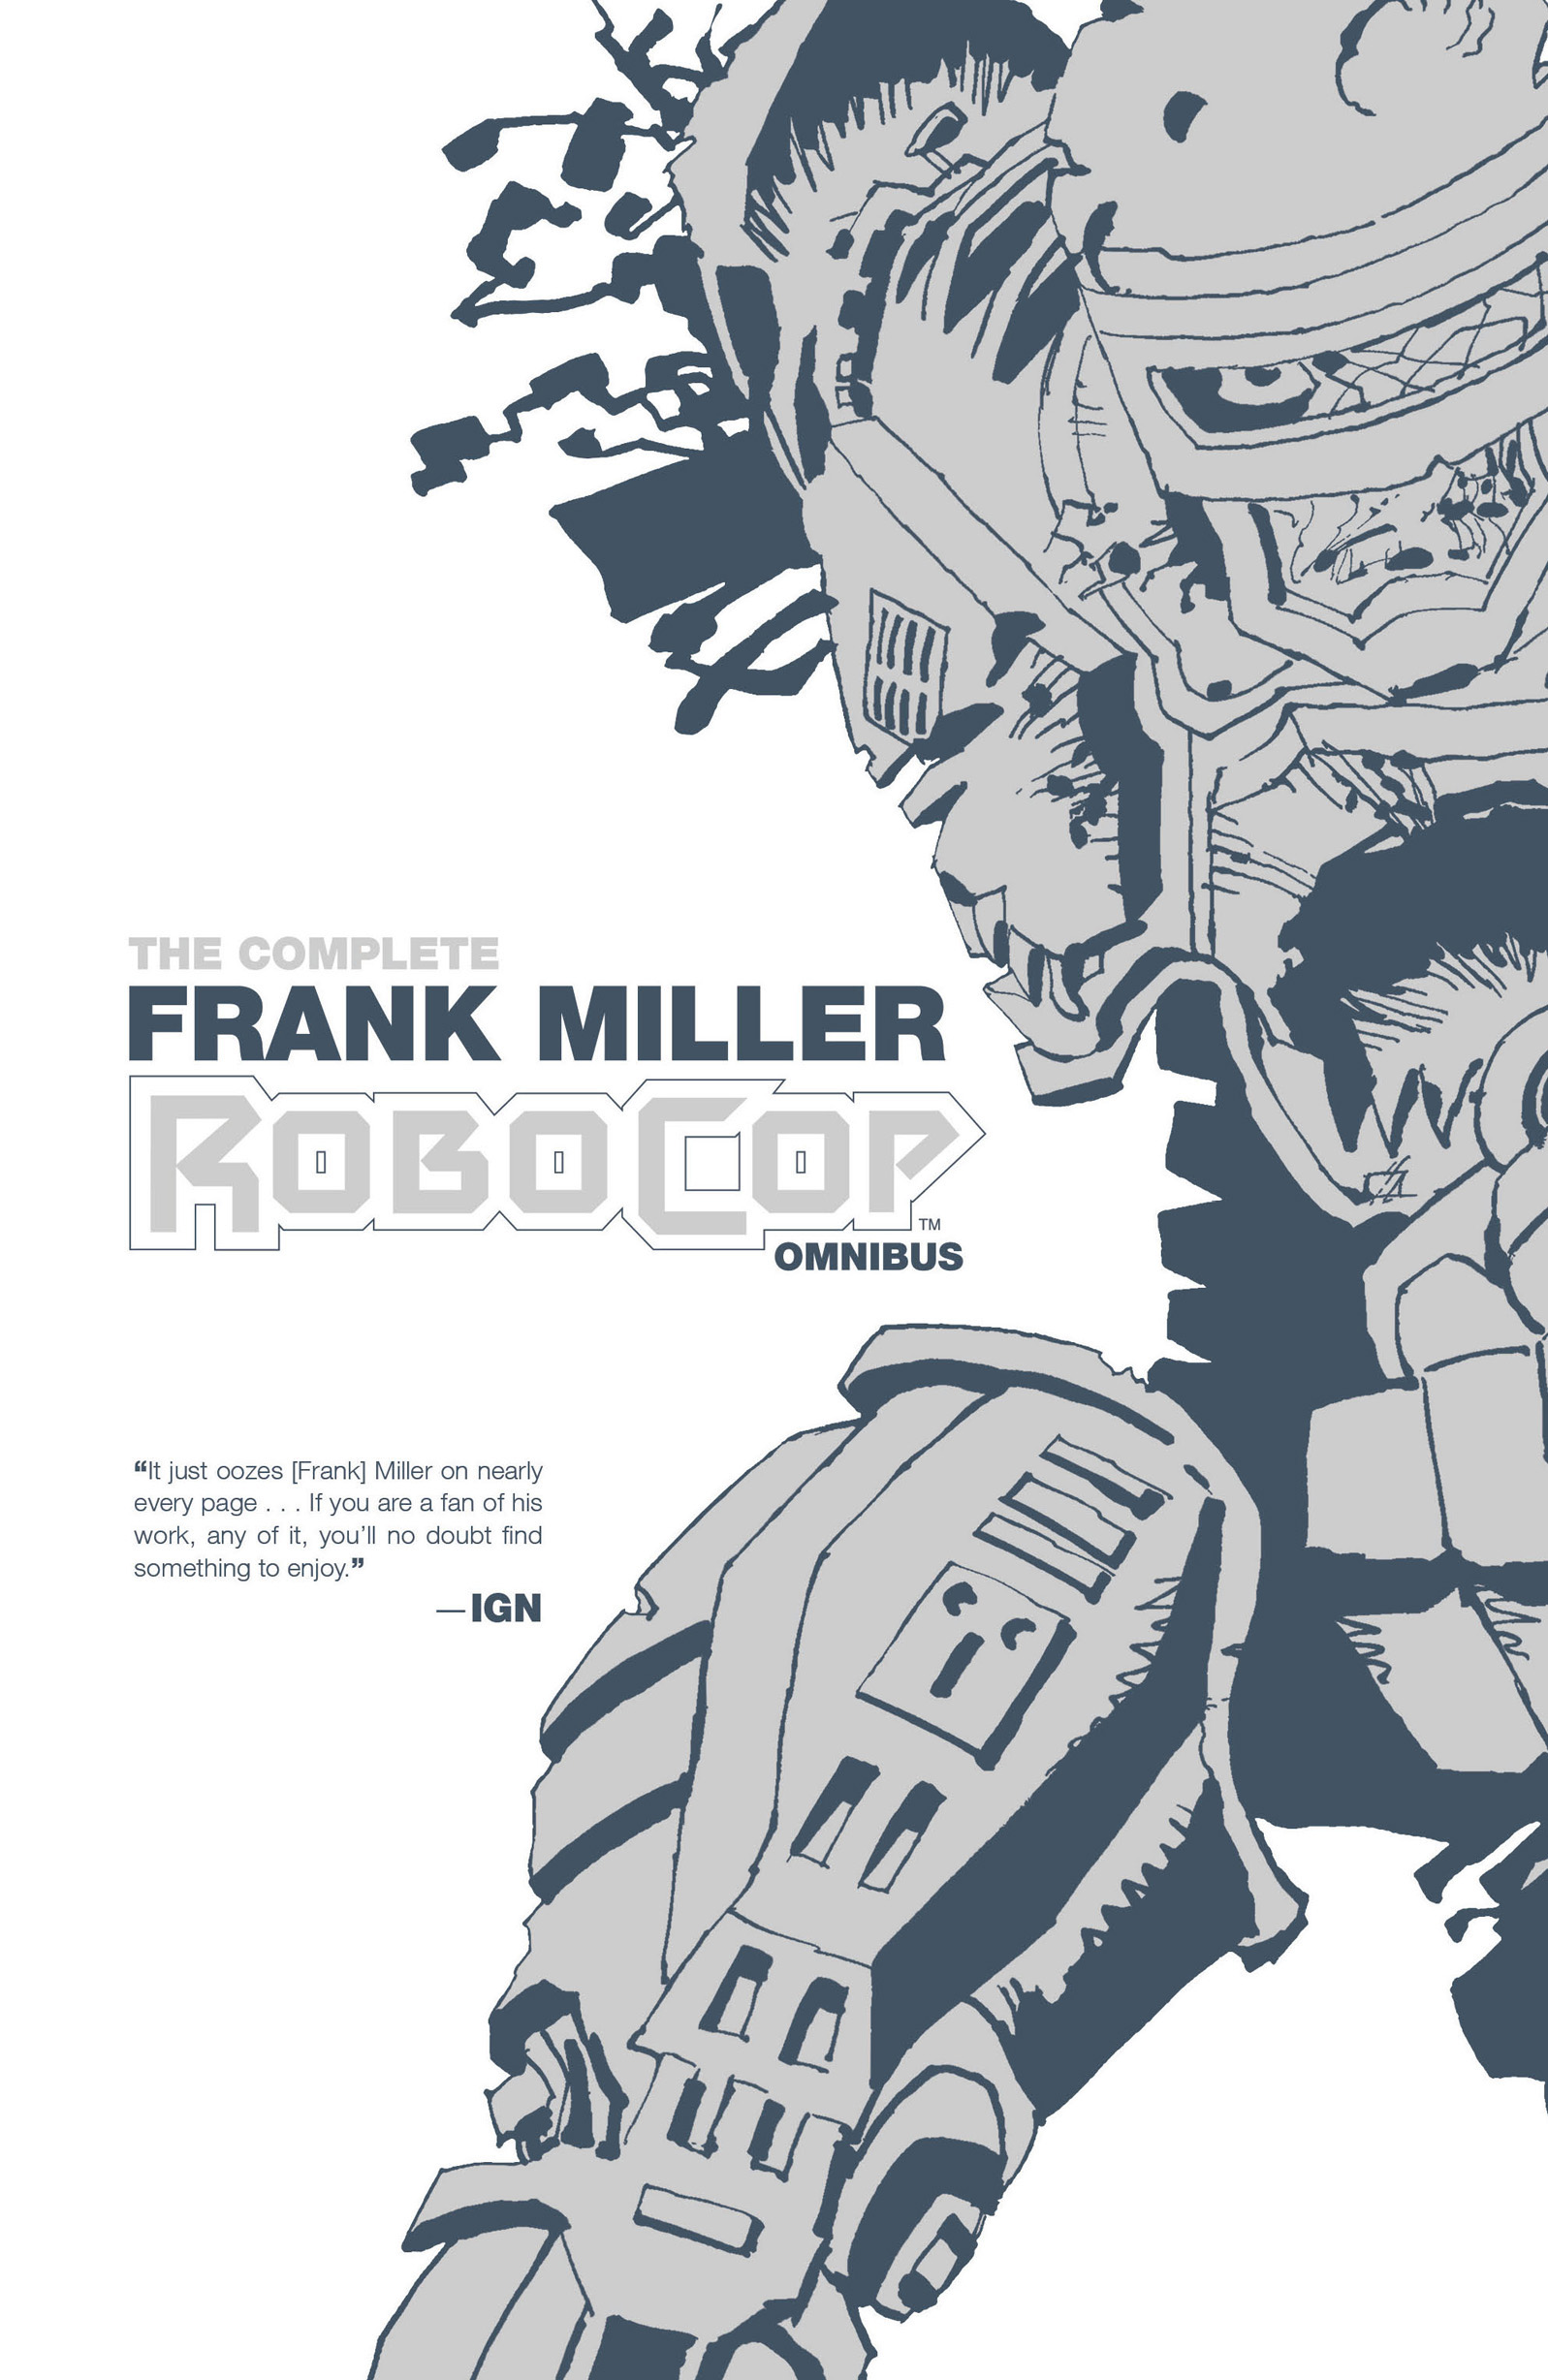 This image is the cover for the book The Complete Frank Miller Robocop Omnibus, RoboCop